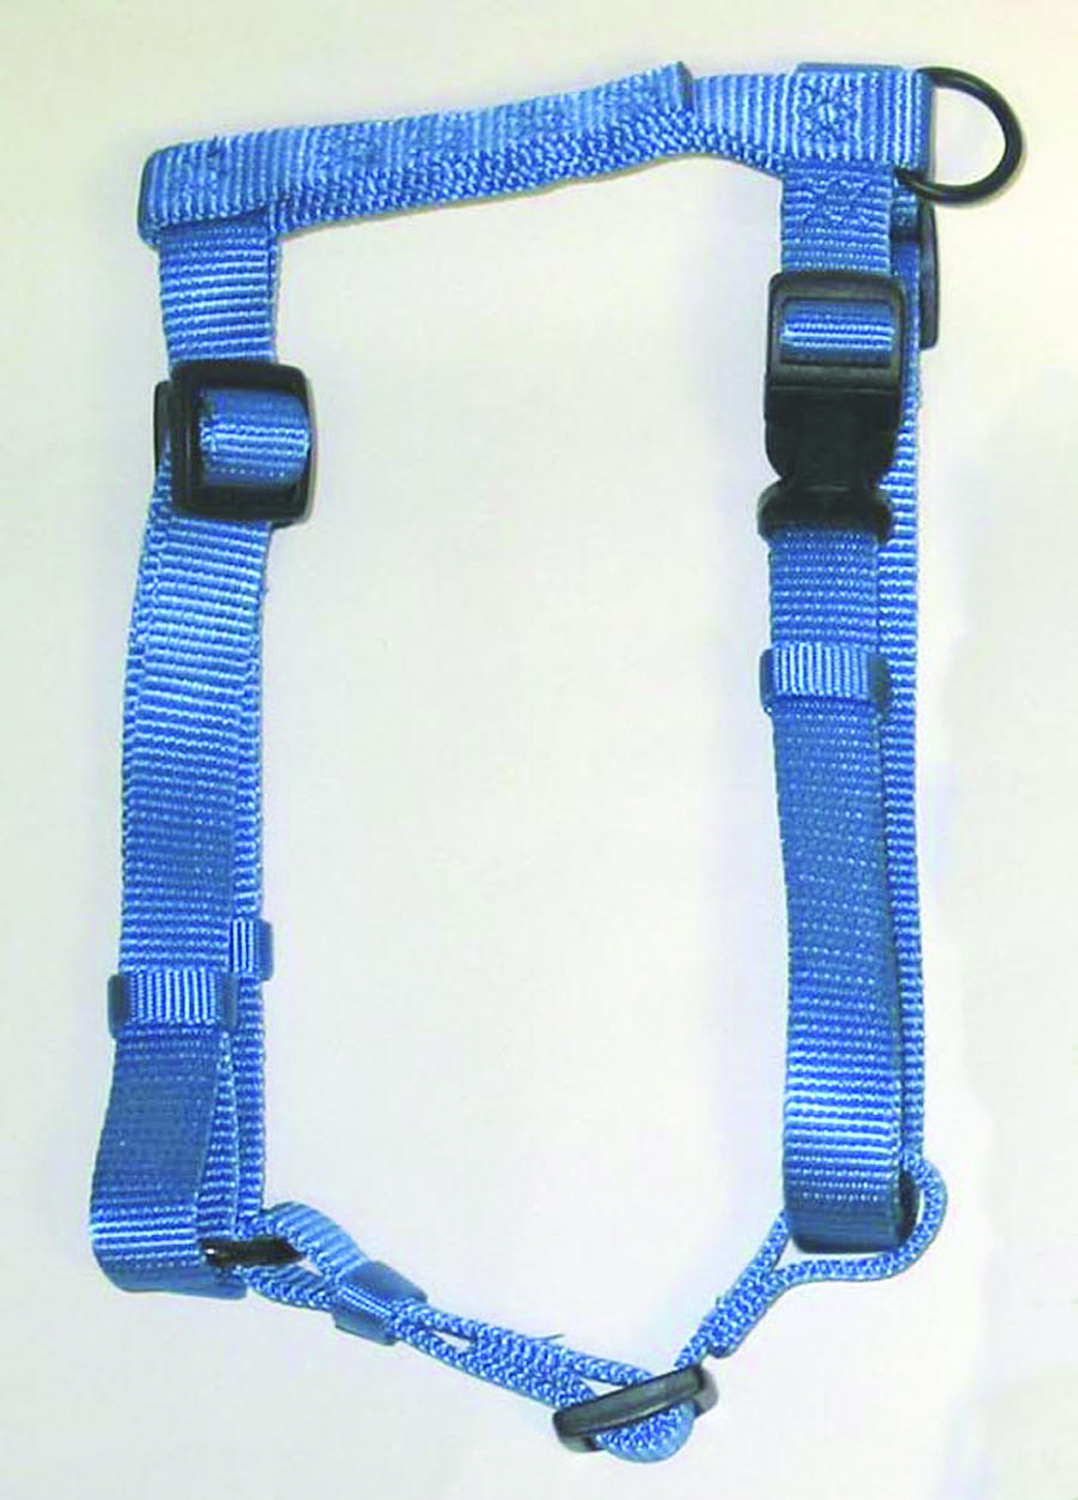 Adjustable Dog Harness - Berry Blue - Small